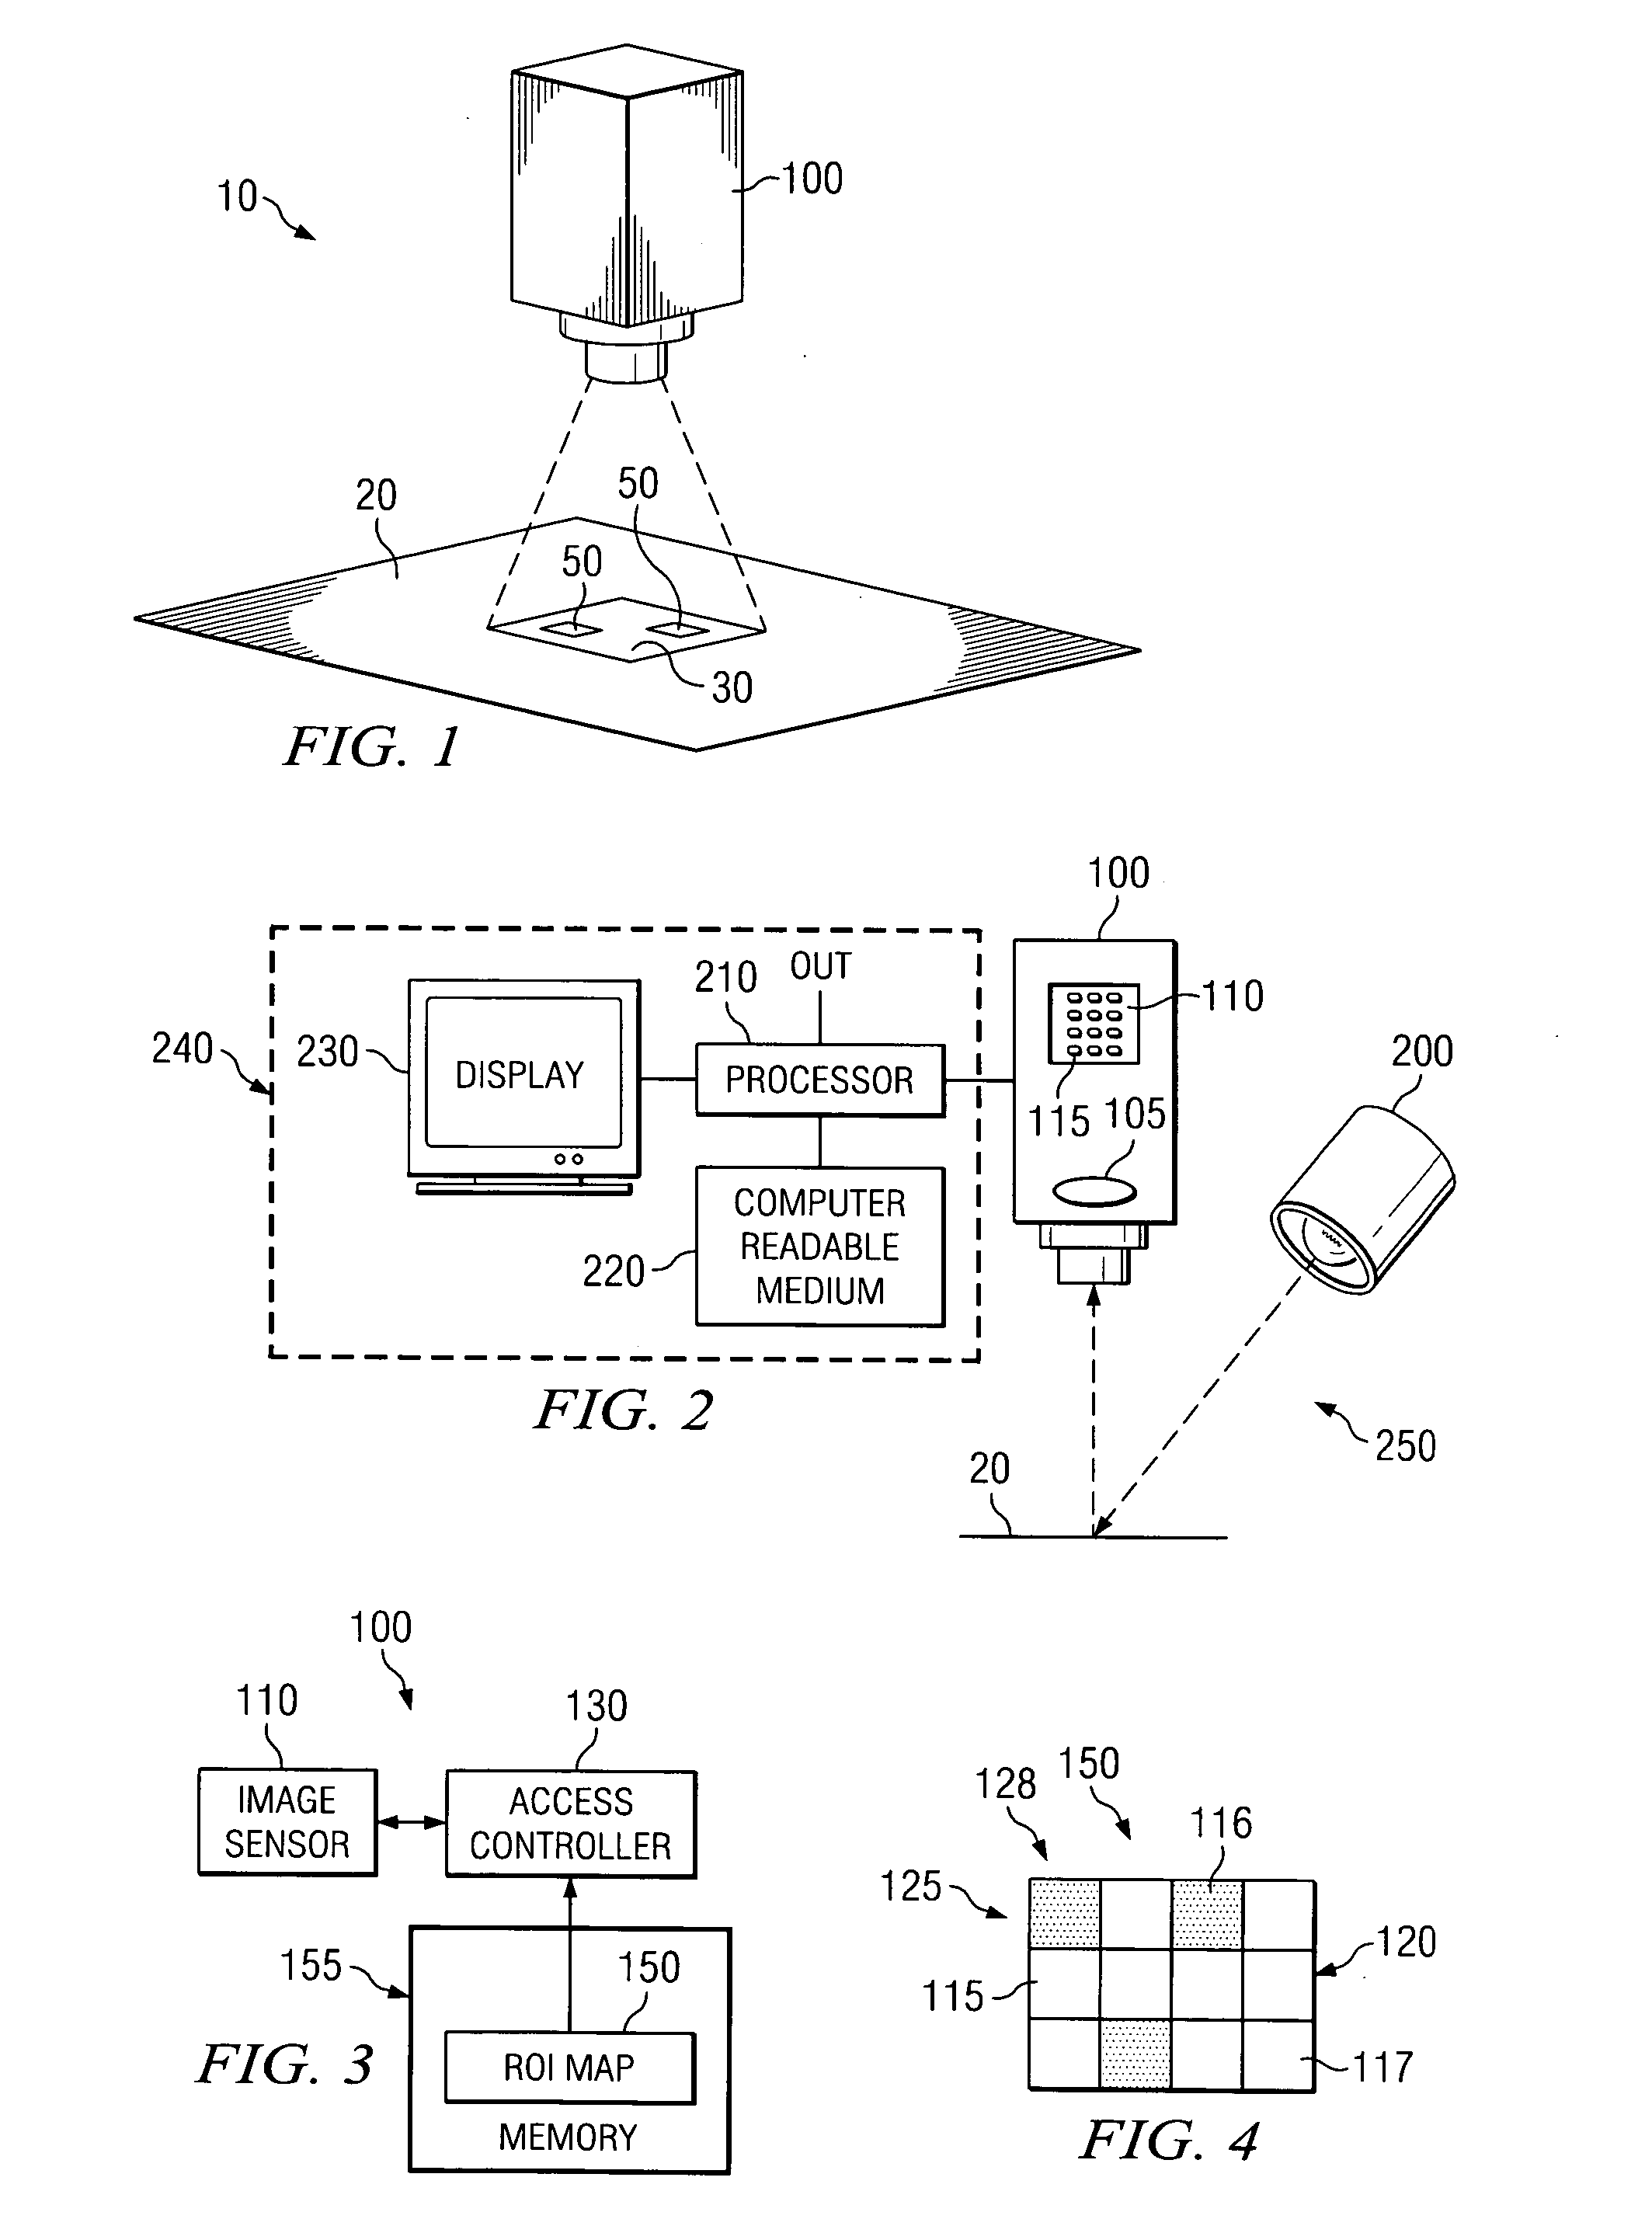 System and method for imaging regions of interest